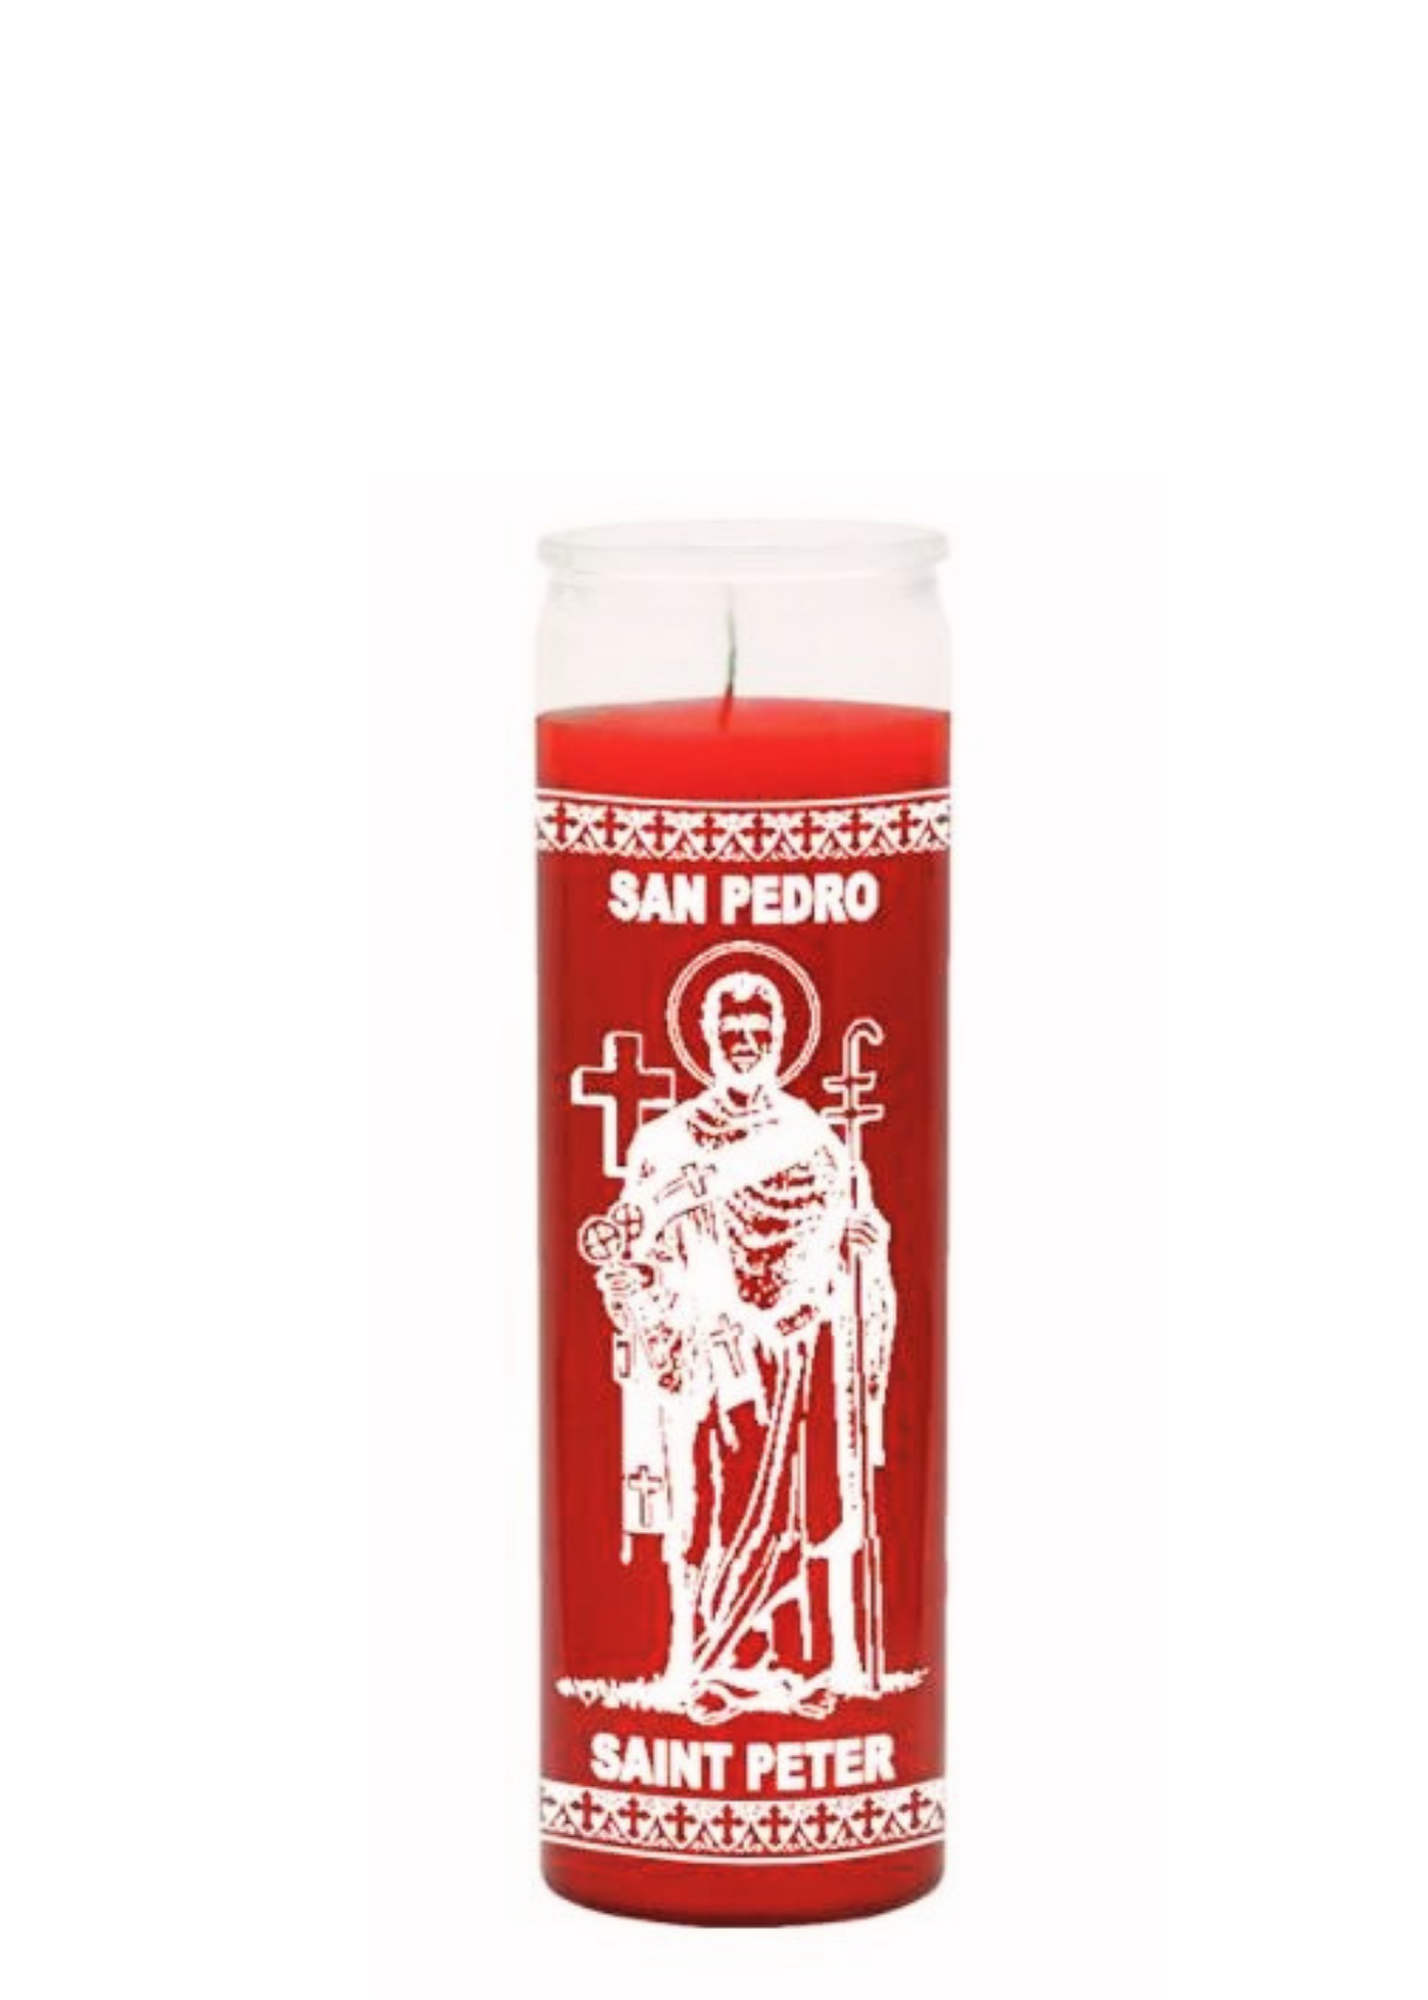 SAINT PETER (Red ) 1 COLOR 7 DAY CANDLE